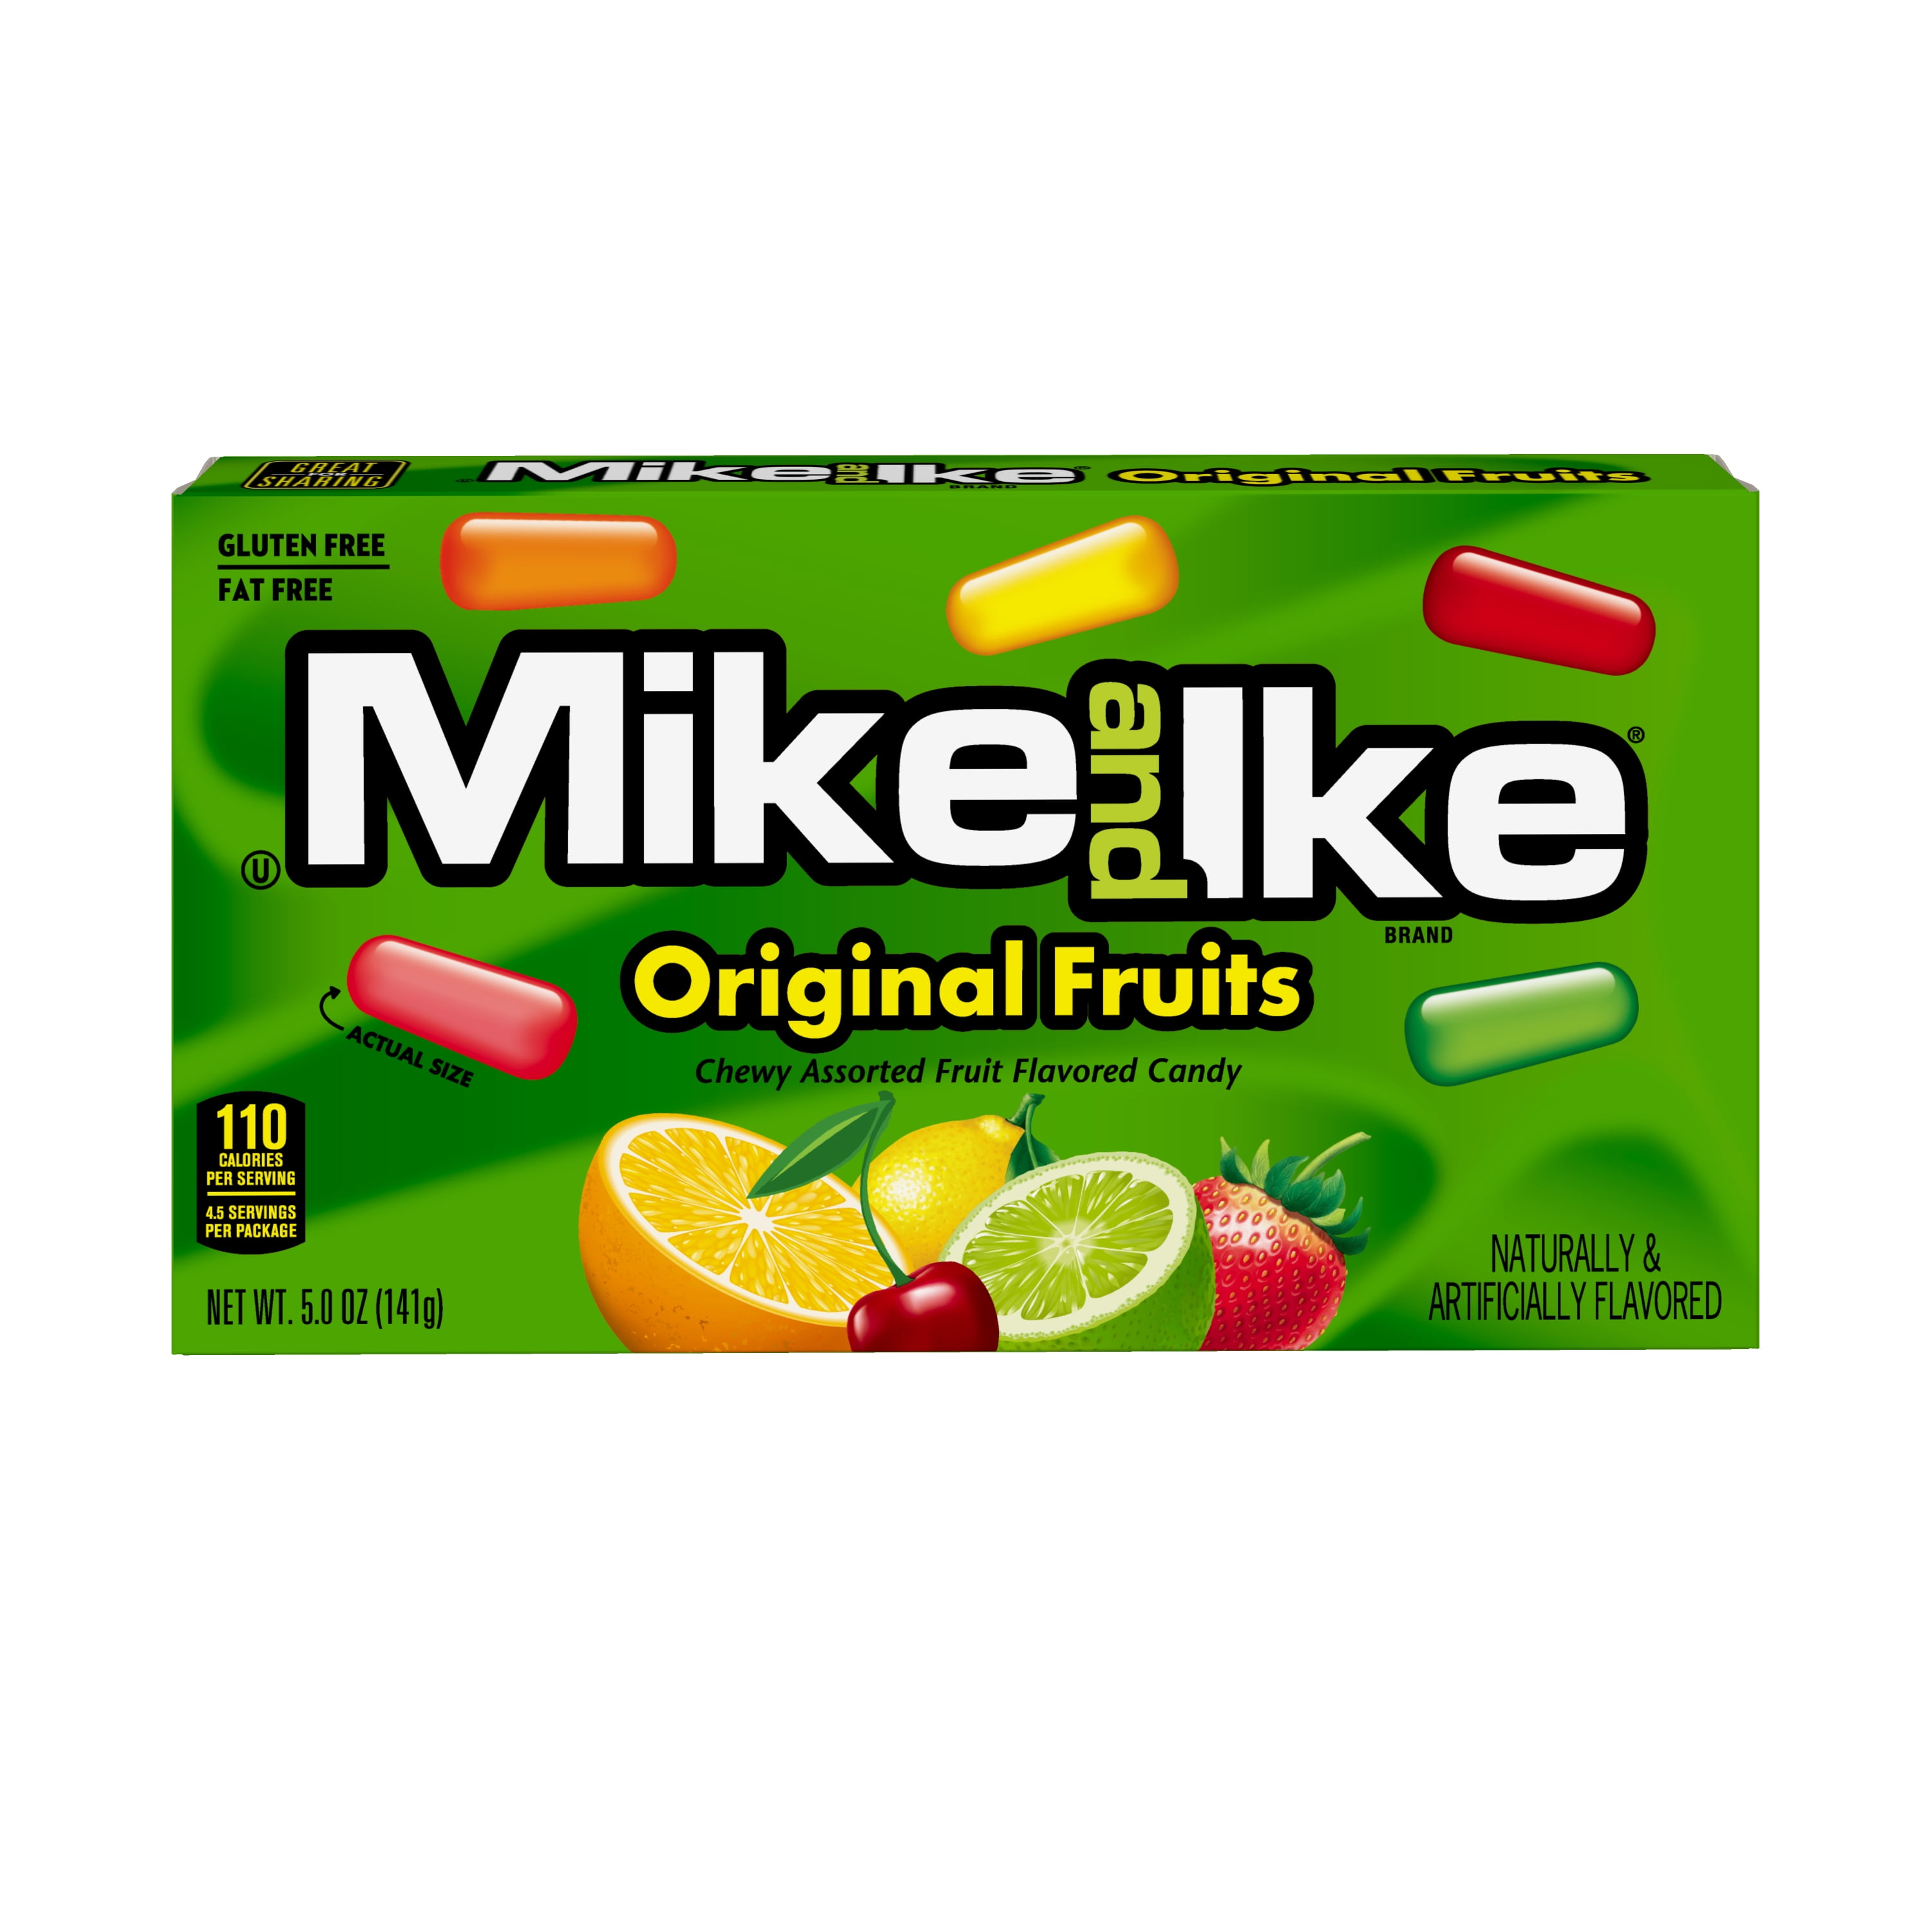 Mike and Ike Original Fruits Chewy Candy, 5 ounce Theater Box, 1 count